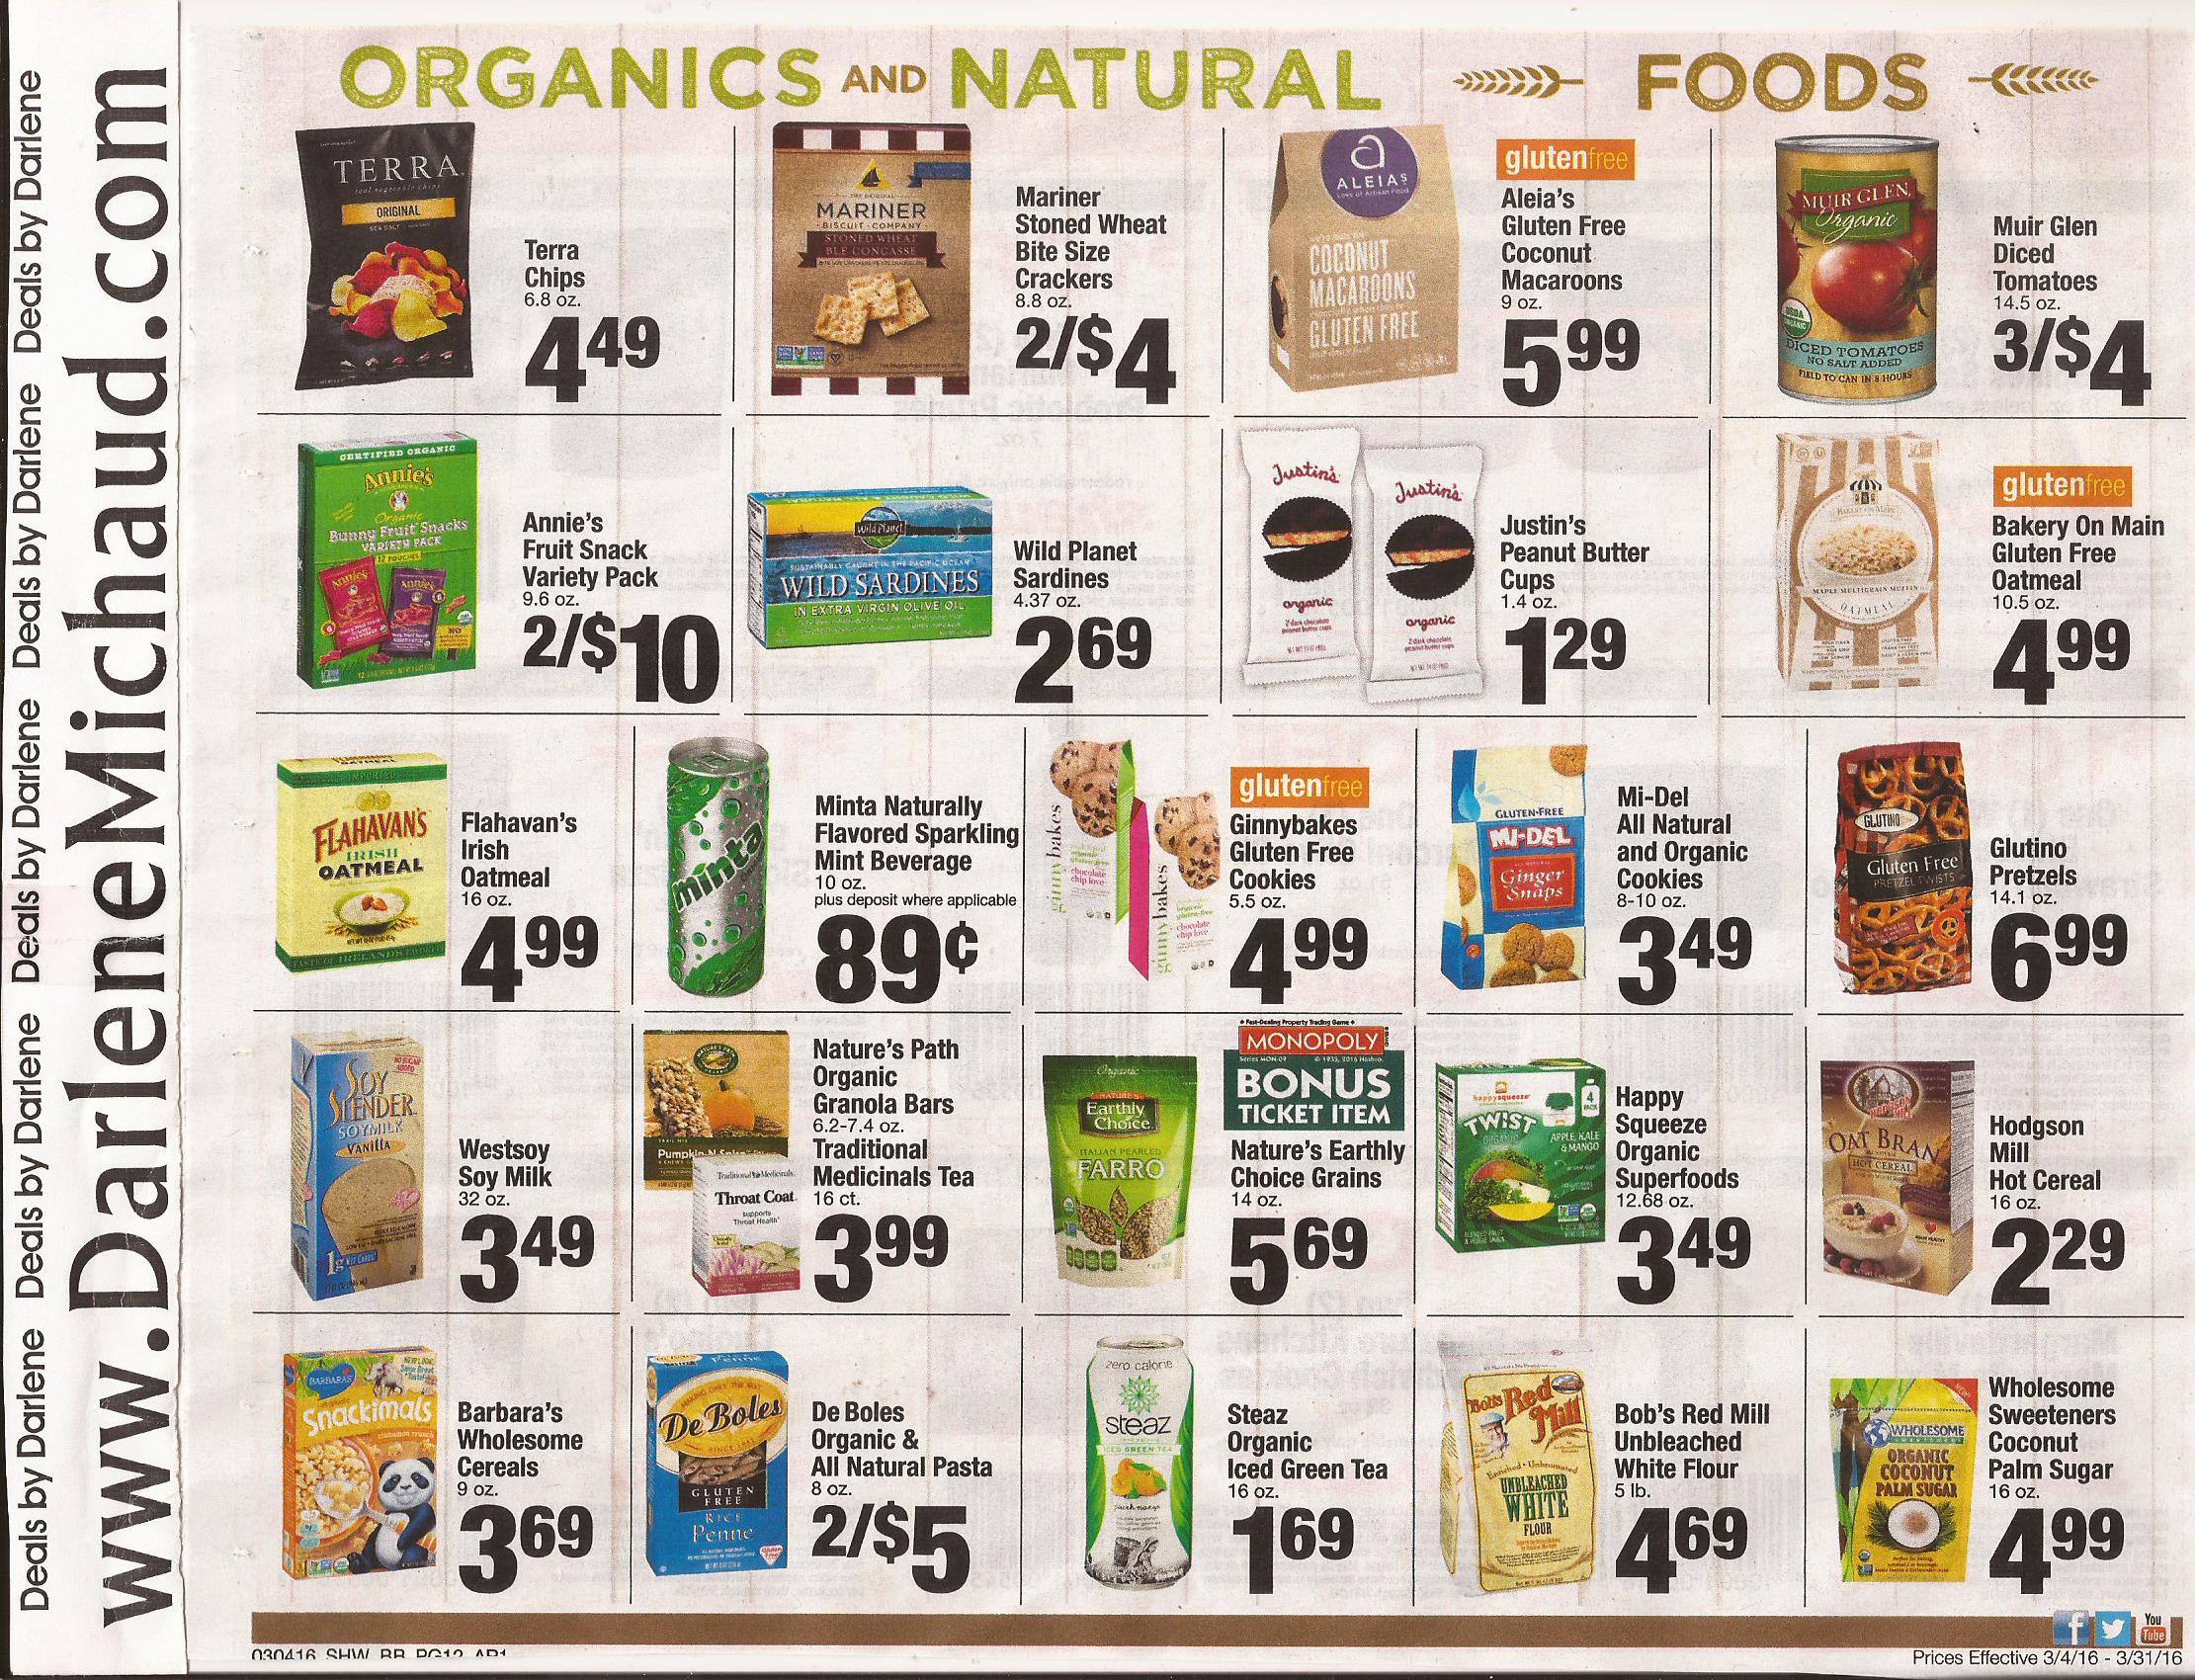 shaws-big-book-savings-march-4-march-31-page-12